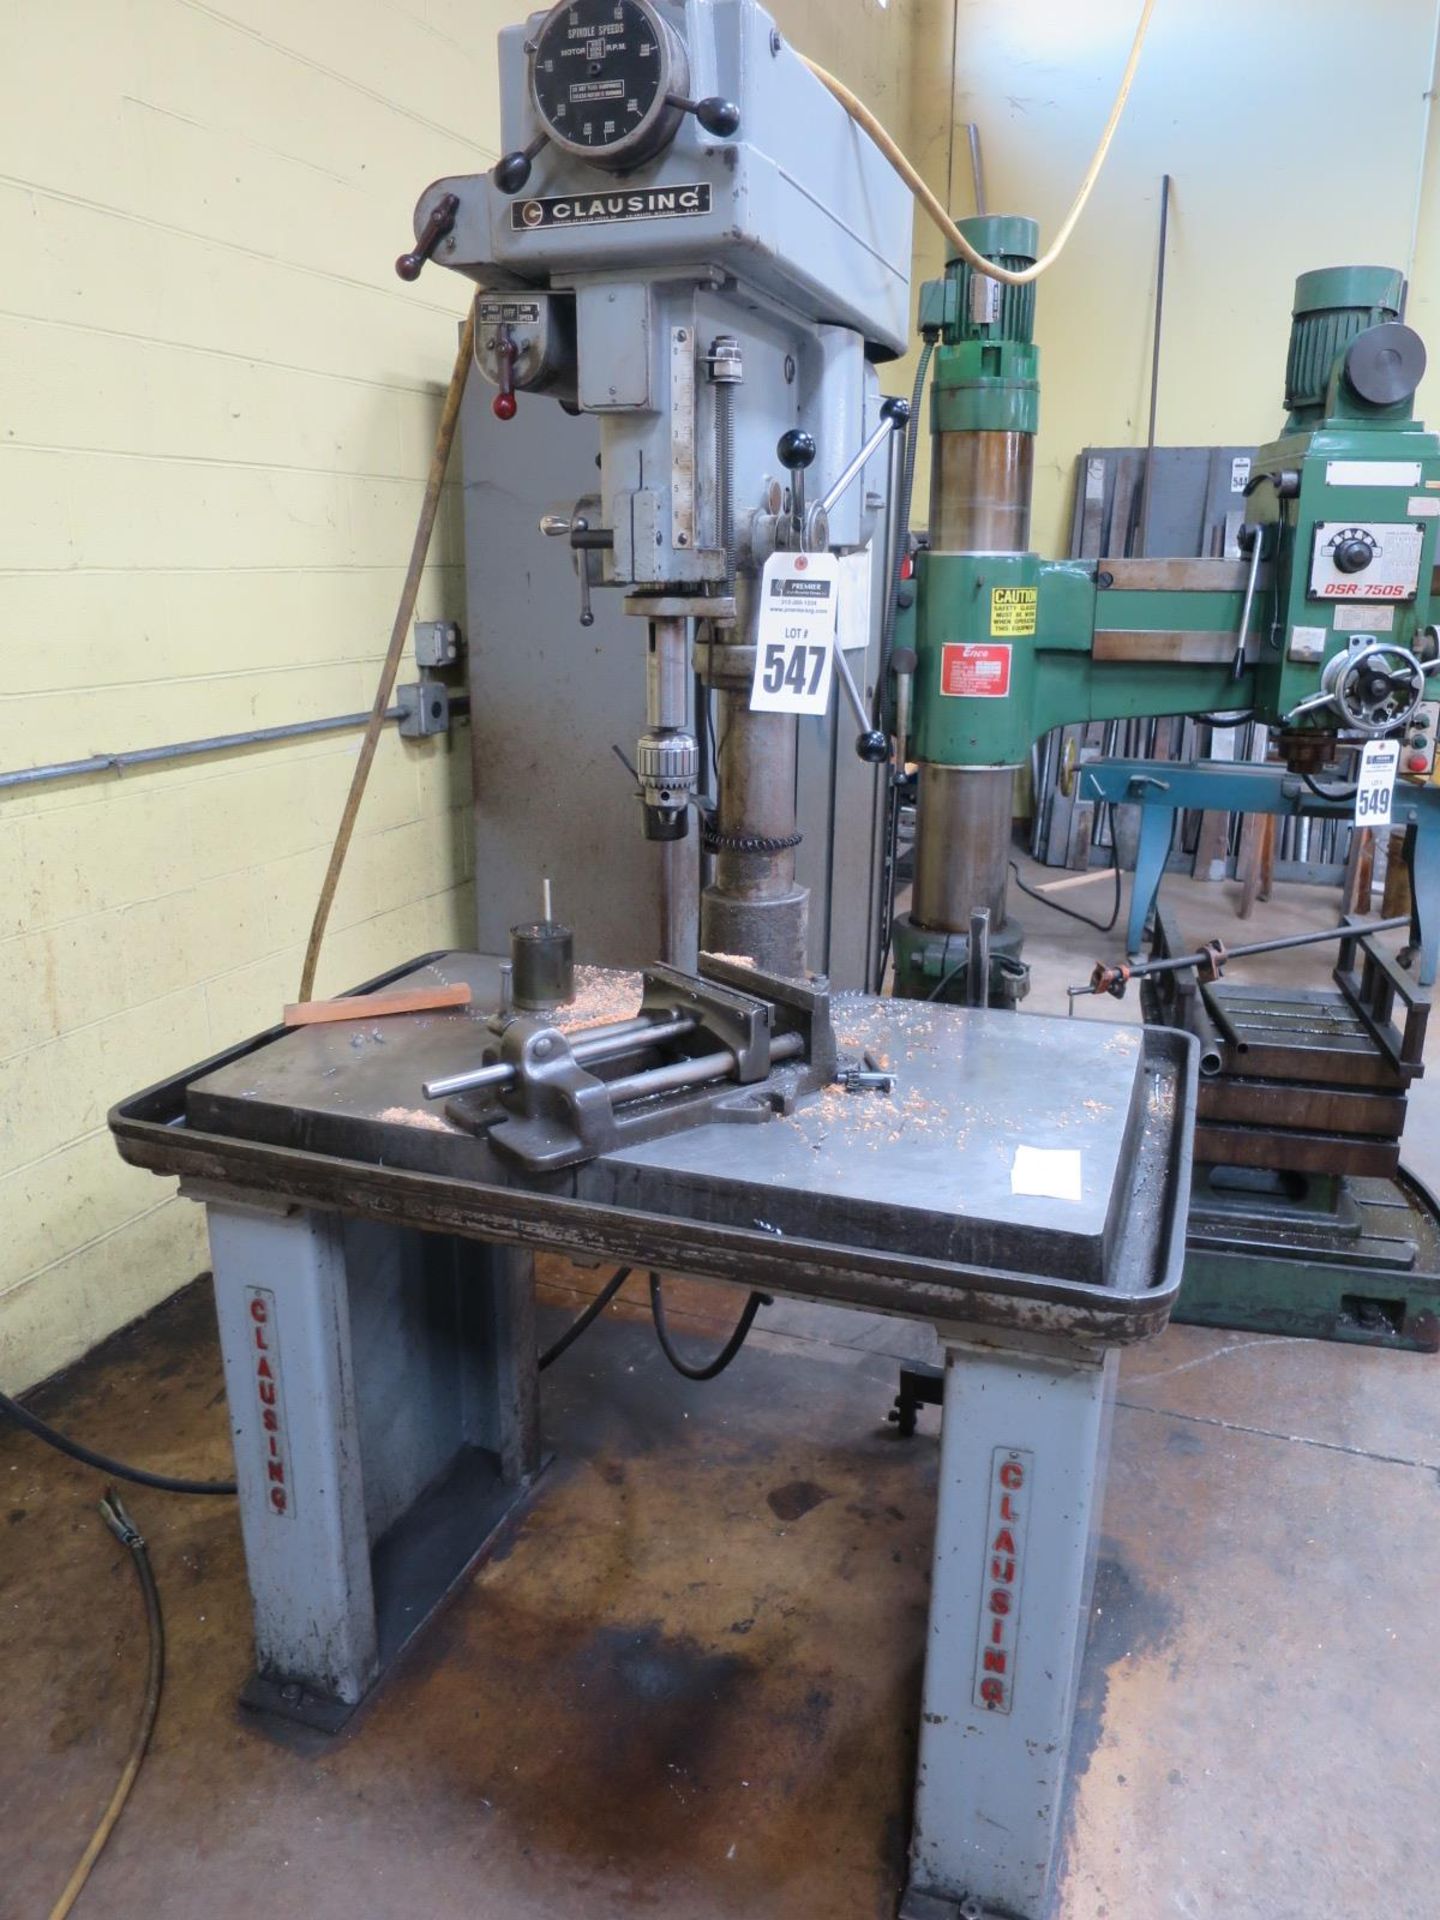 Clausing Series 22V 20" Variable Speed Drill Press, Sn 501841 With Jacobs Chuck and vice